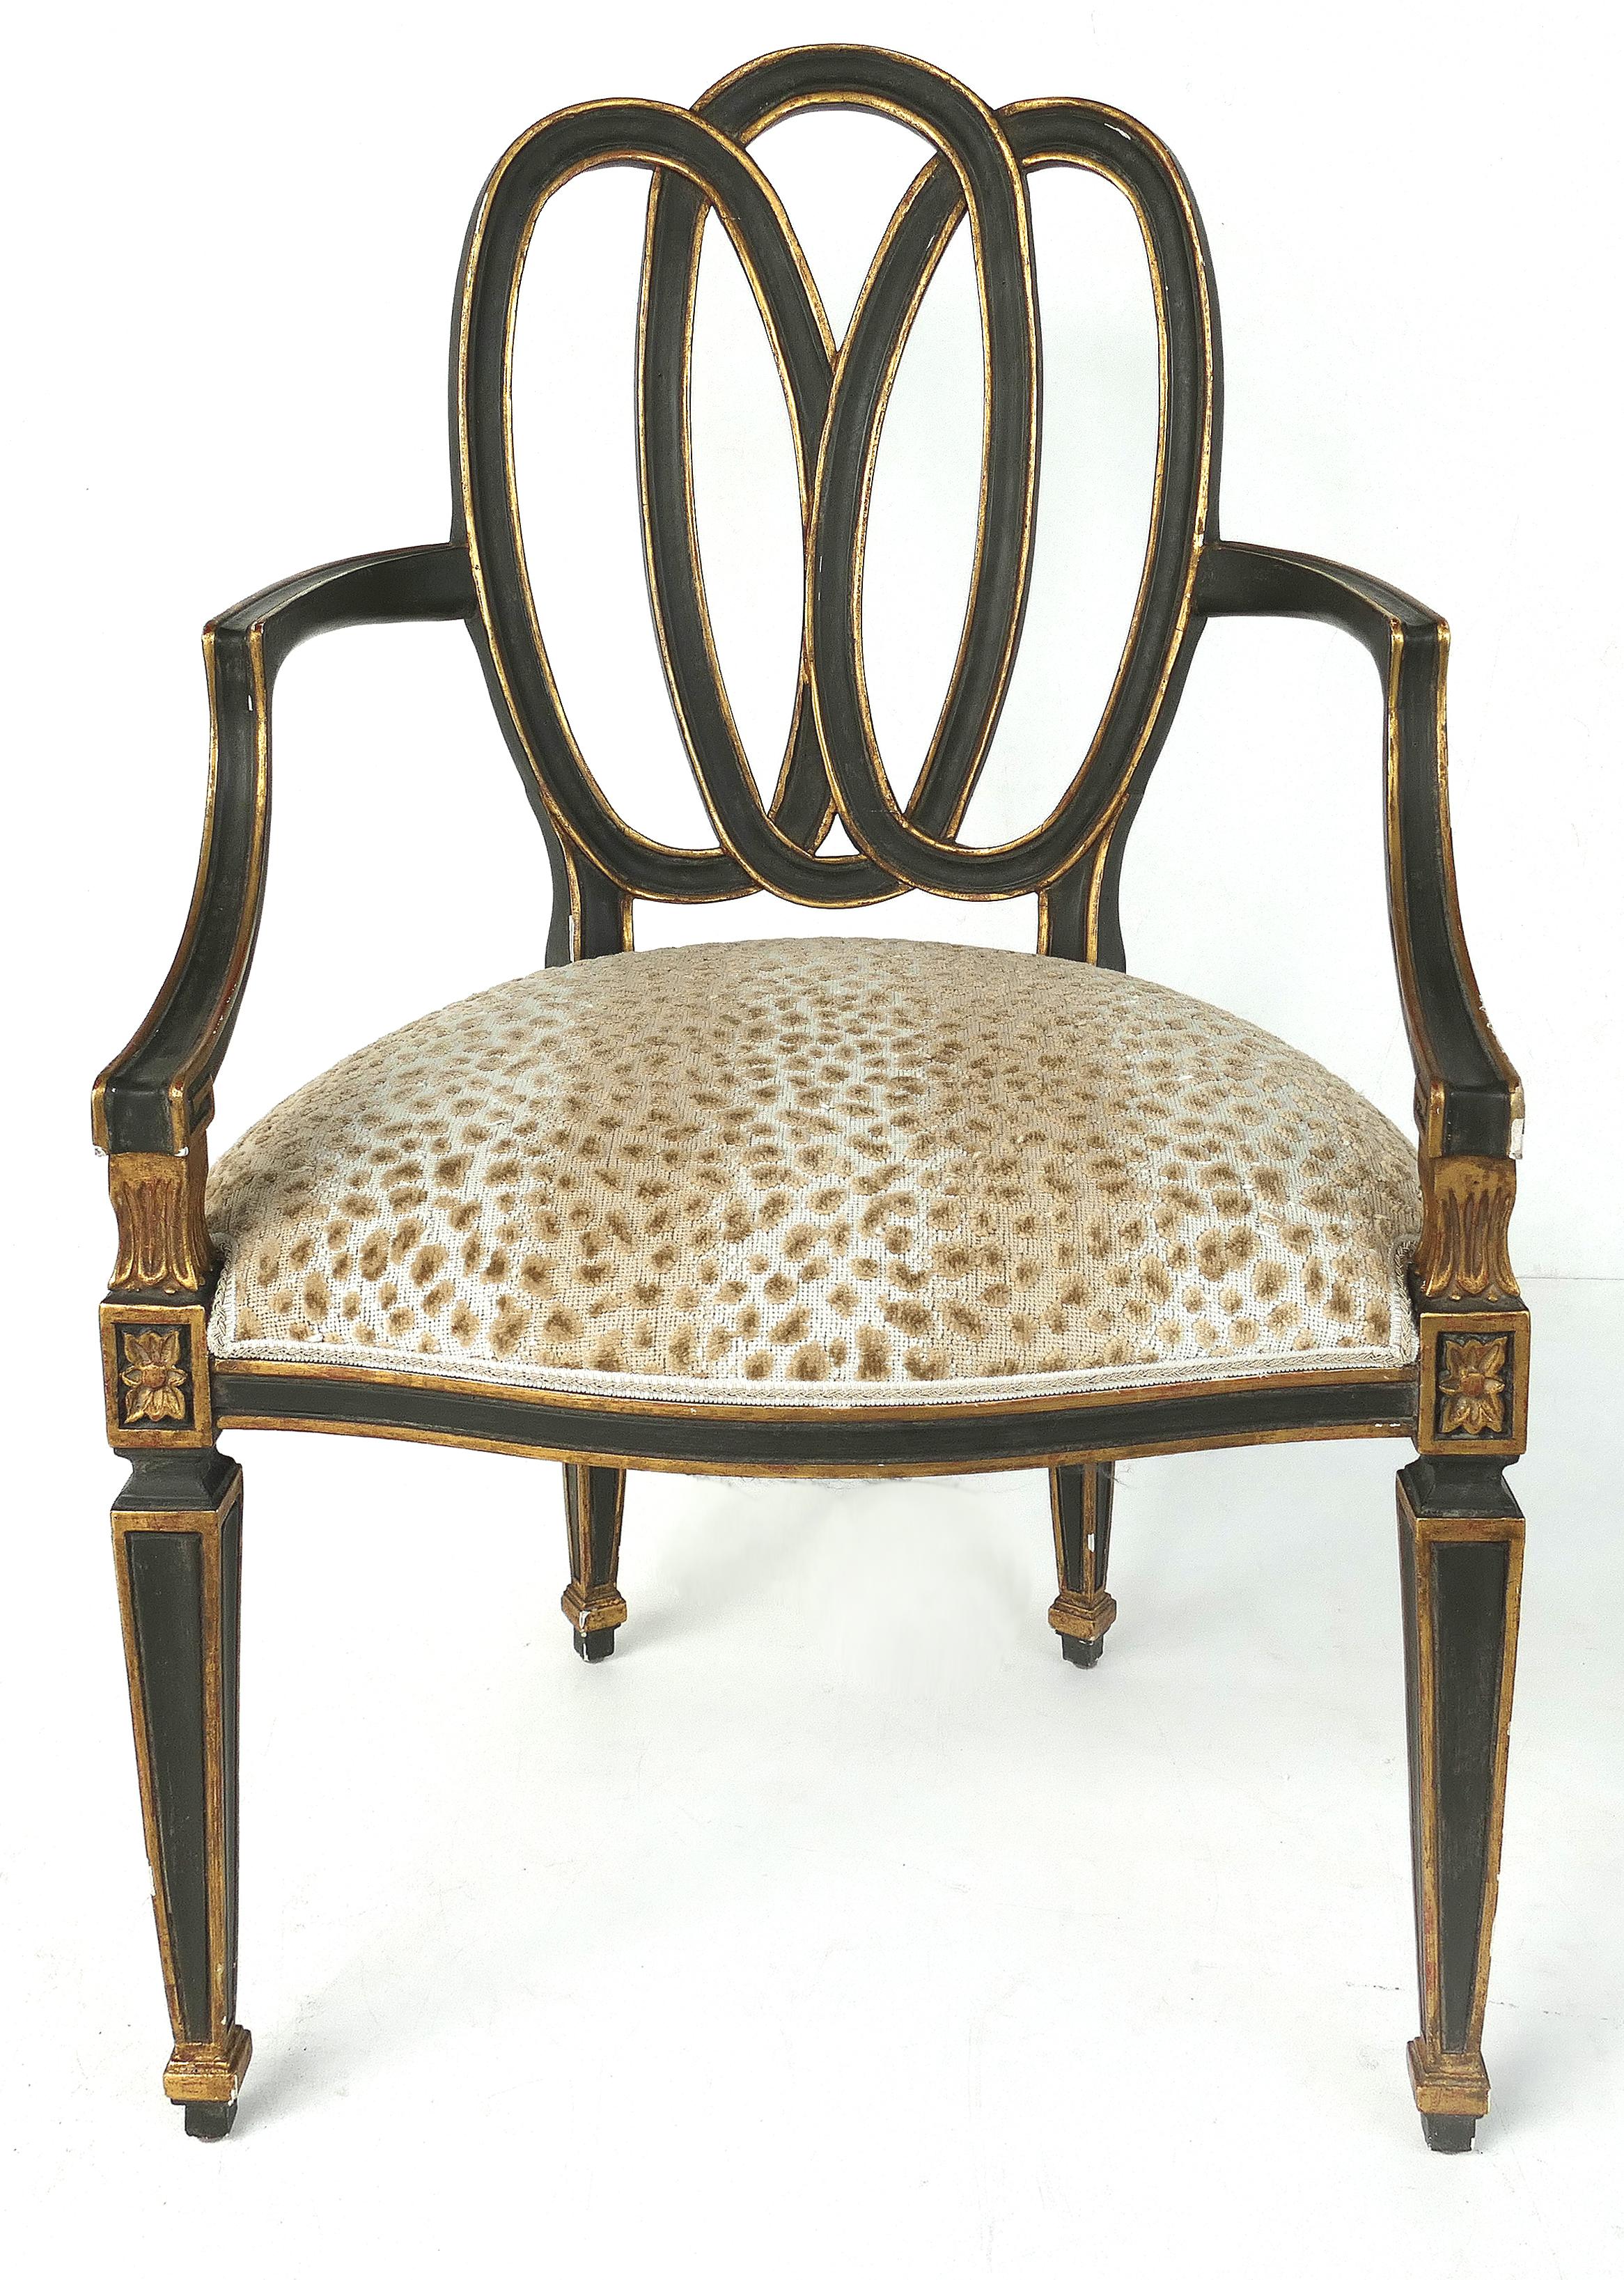 Dennis & Leen ebonized and parcel-gilt armchairs in the neoclassical style

Offered for sale is a pair of Dennis & Leen (Los Angeles, CA) ebonized and parcel-gilt neoclassical style armchairs. Both chairs have upholstered seats with an animal